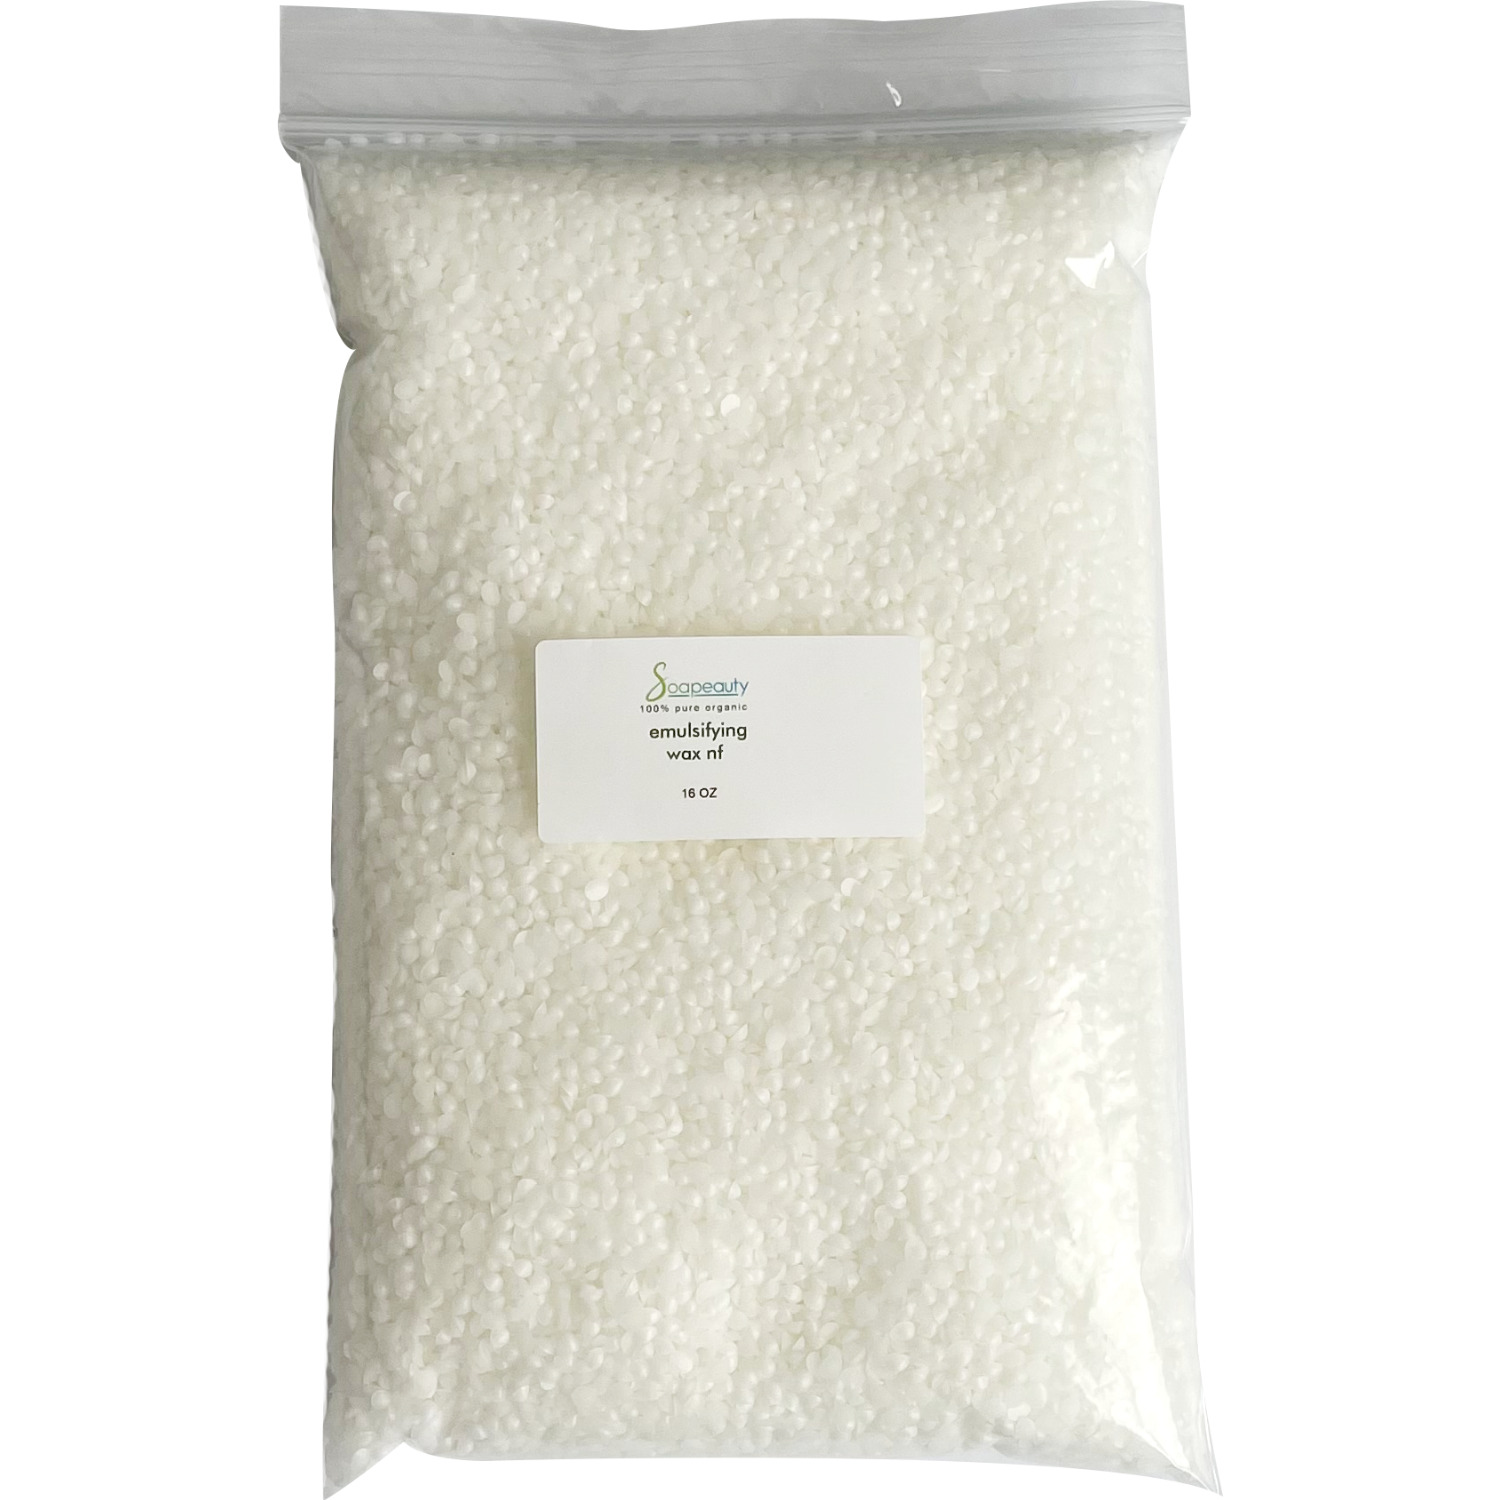 EMULSIFYING WAX NF POLYSORBATE 60 PURE POLAWAX 100% PURE 2 OZ  to 23 LBS